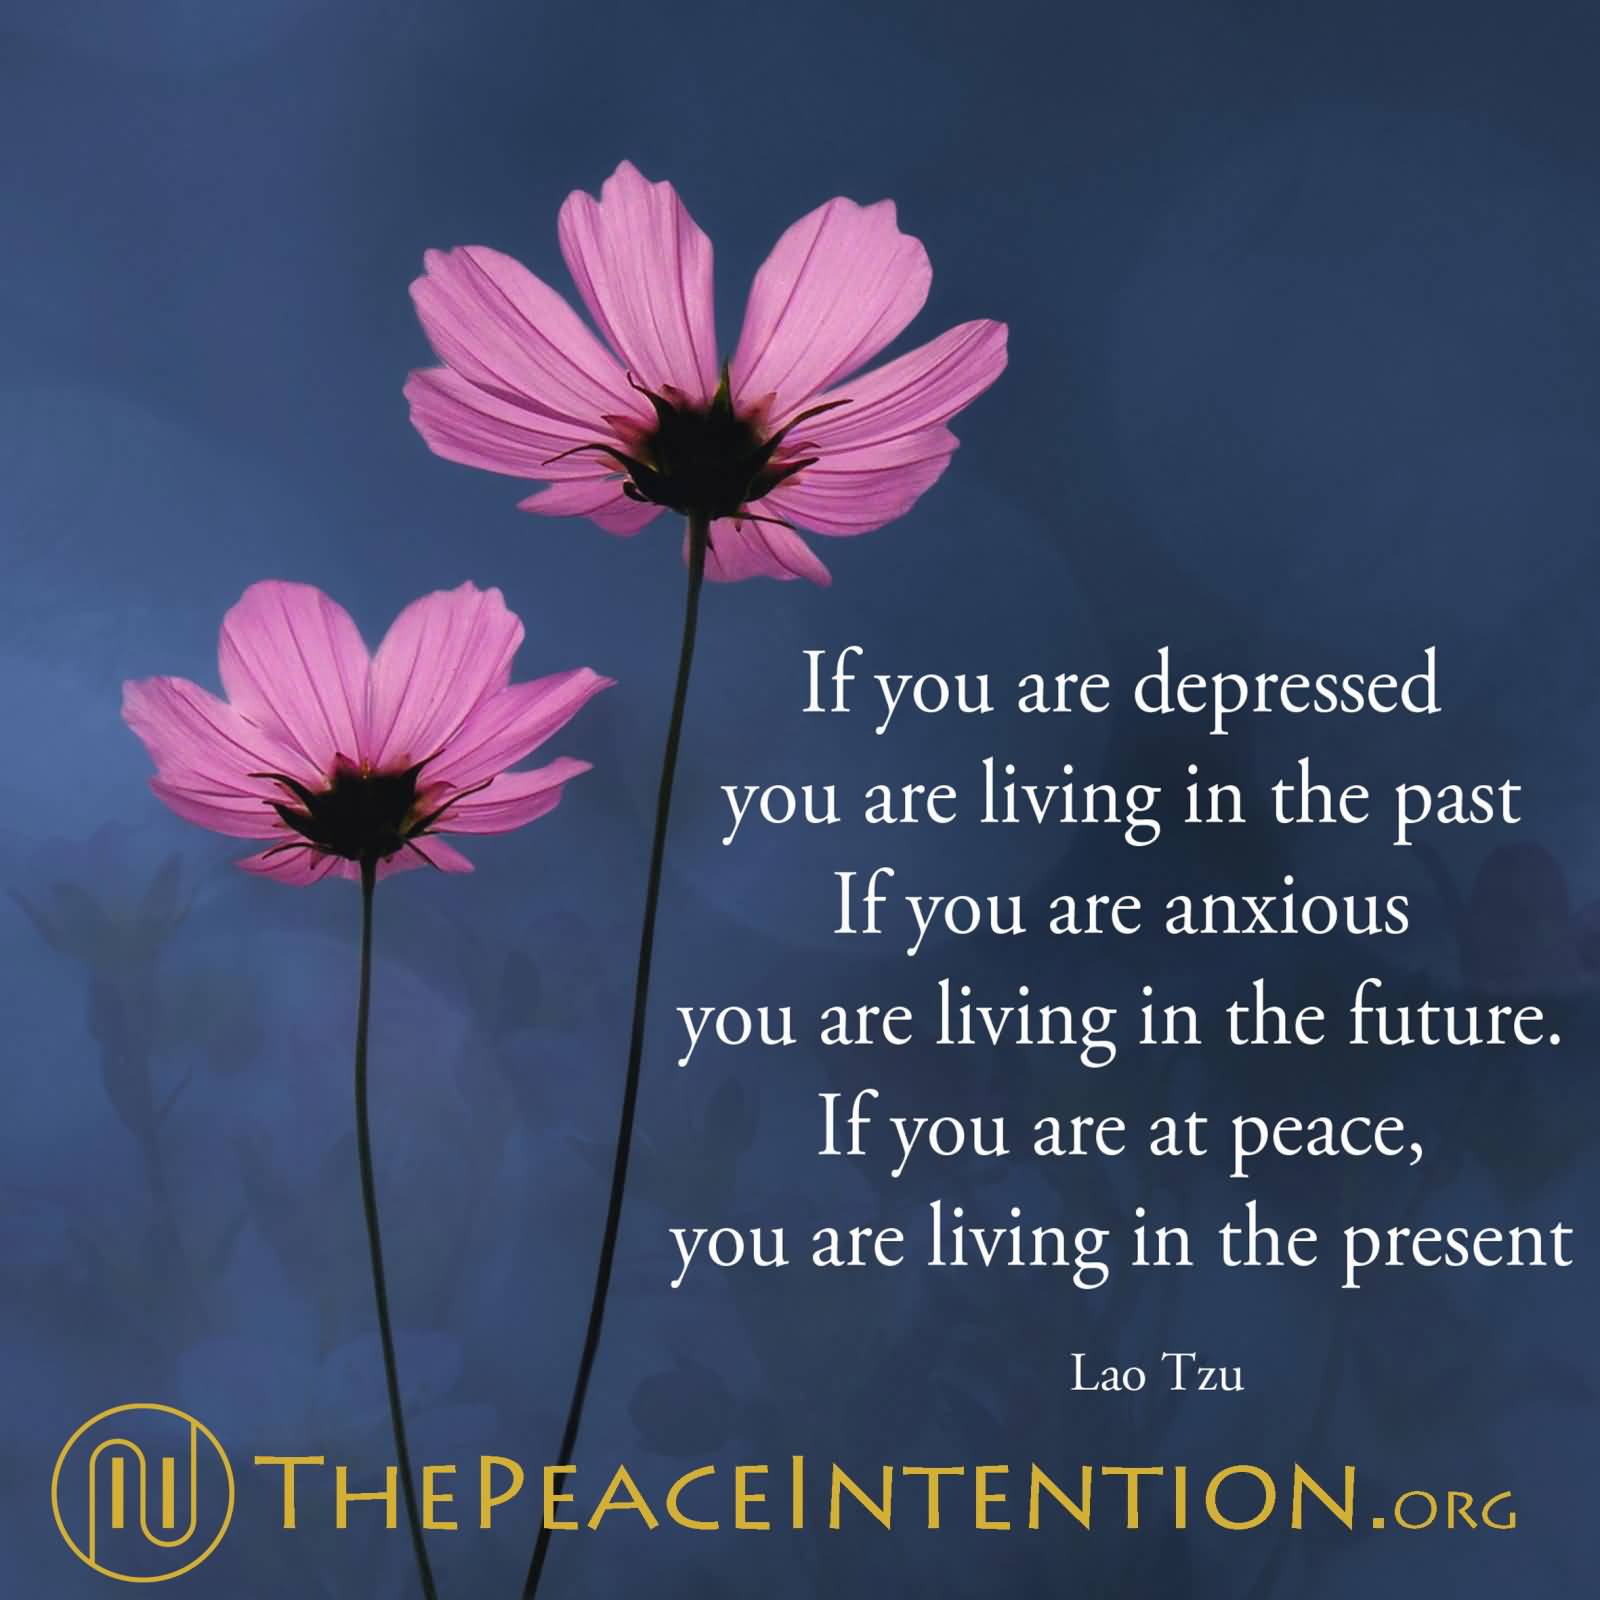 If you are depressed you are living in the past. If you are anxious you are living in the future. If you are at peace you are living in the present.  - Lao Tzu